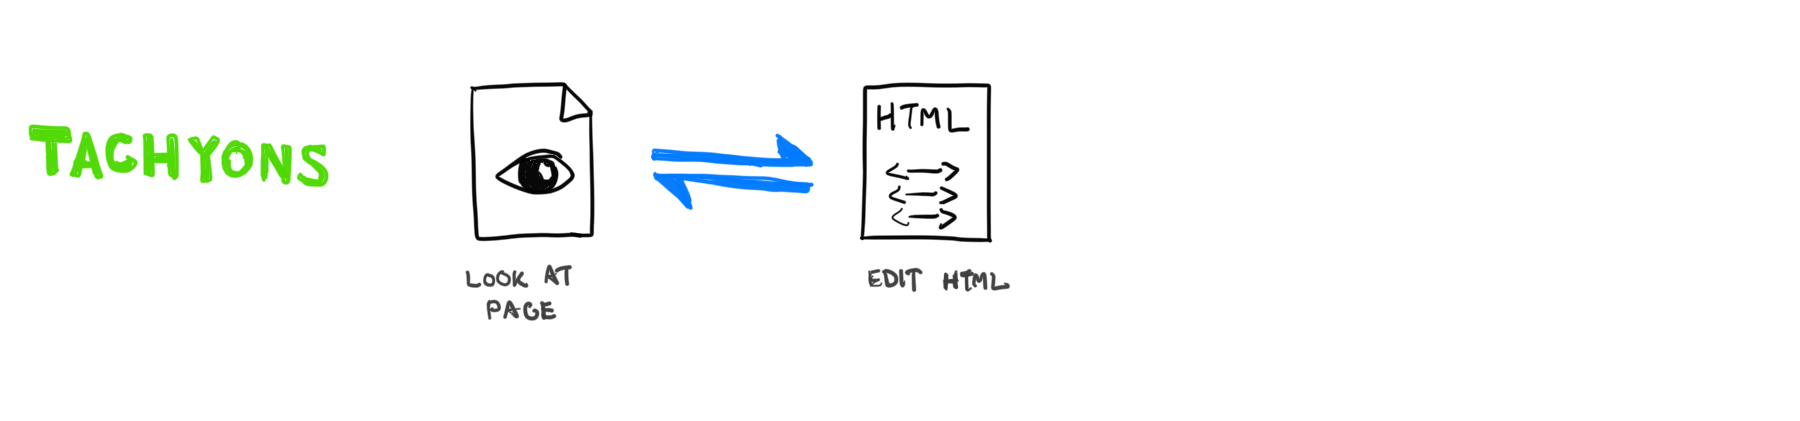 Conceptual diagram of Tachyons: A double-sided arrow goes between "Look at page" and "Edit HTML"